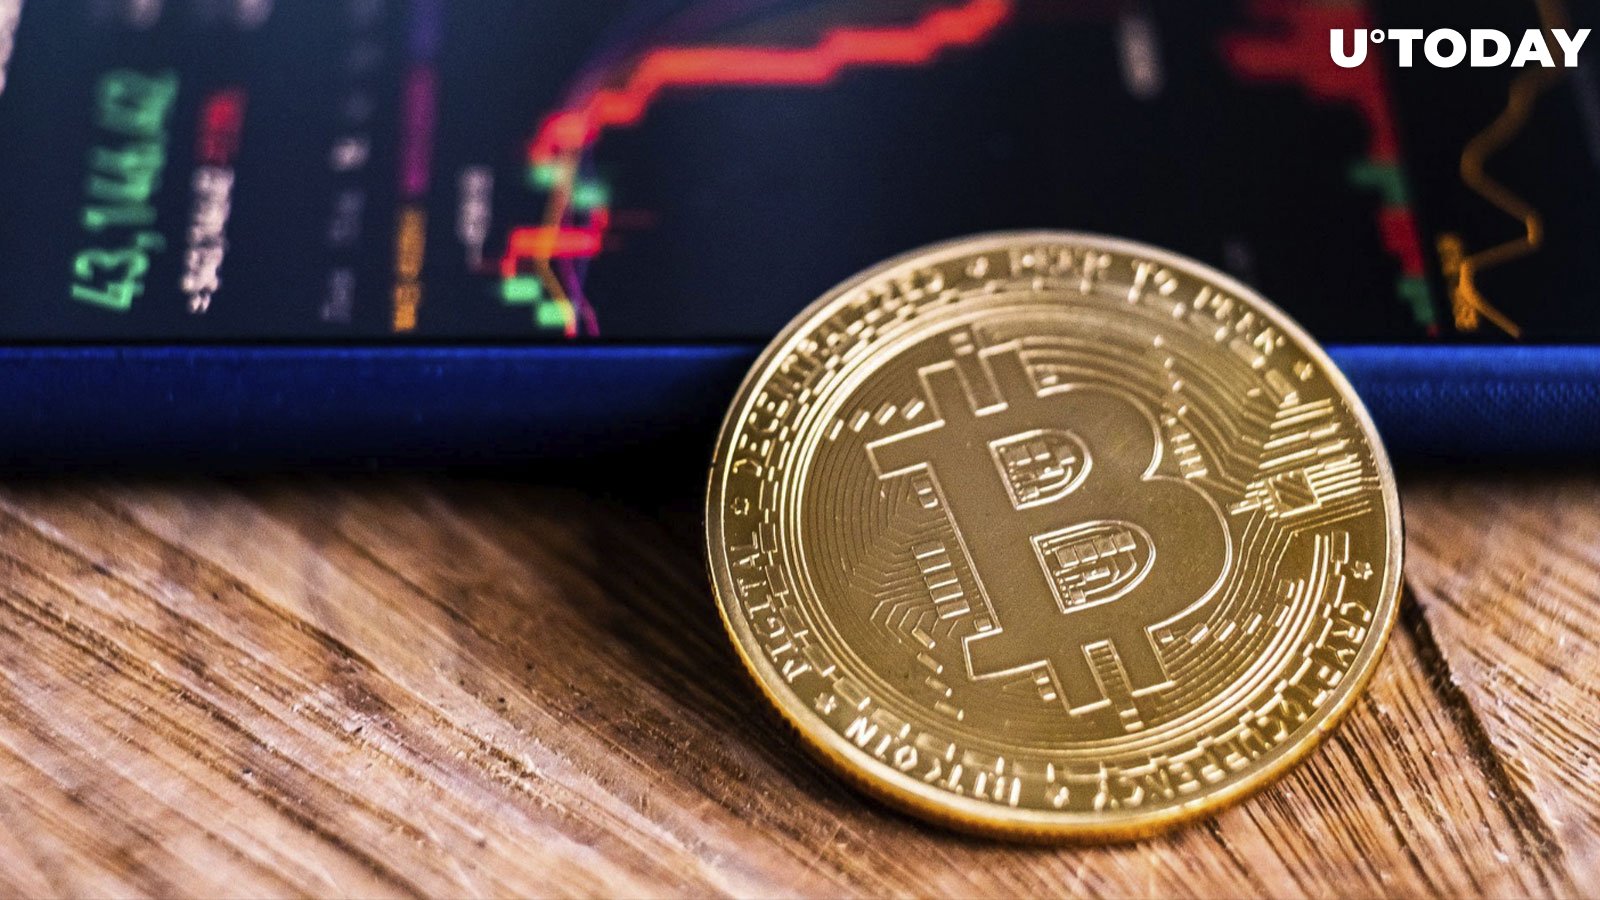 Bitcoin (BTC) to Test $80K Before Upcoming Halving, Says Top Analyst